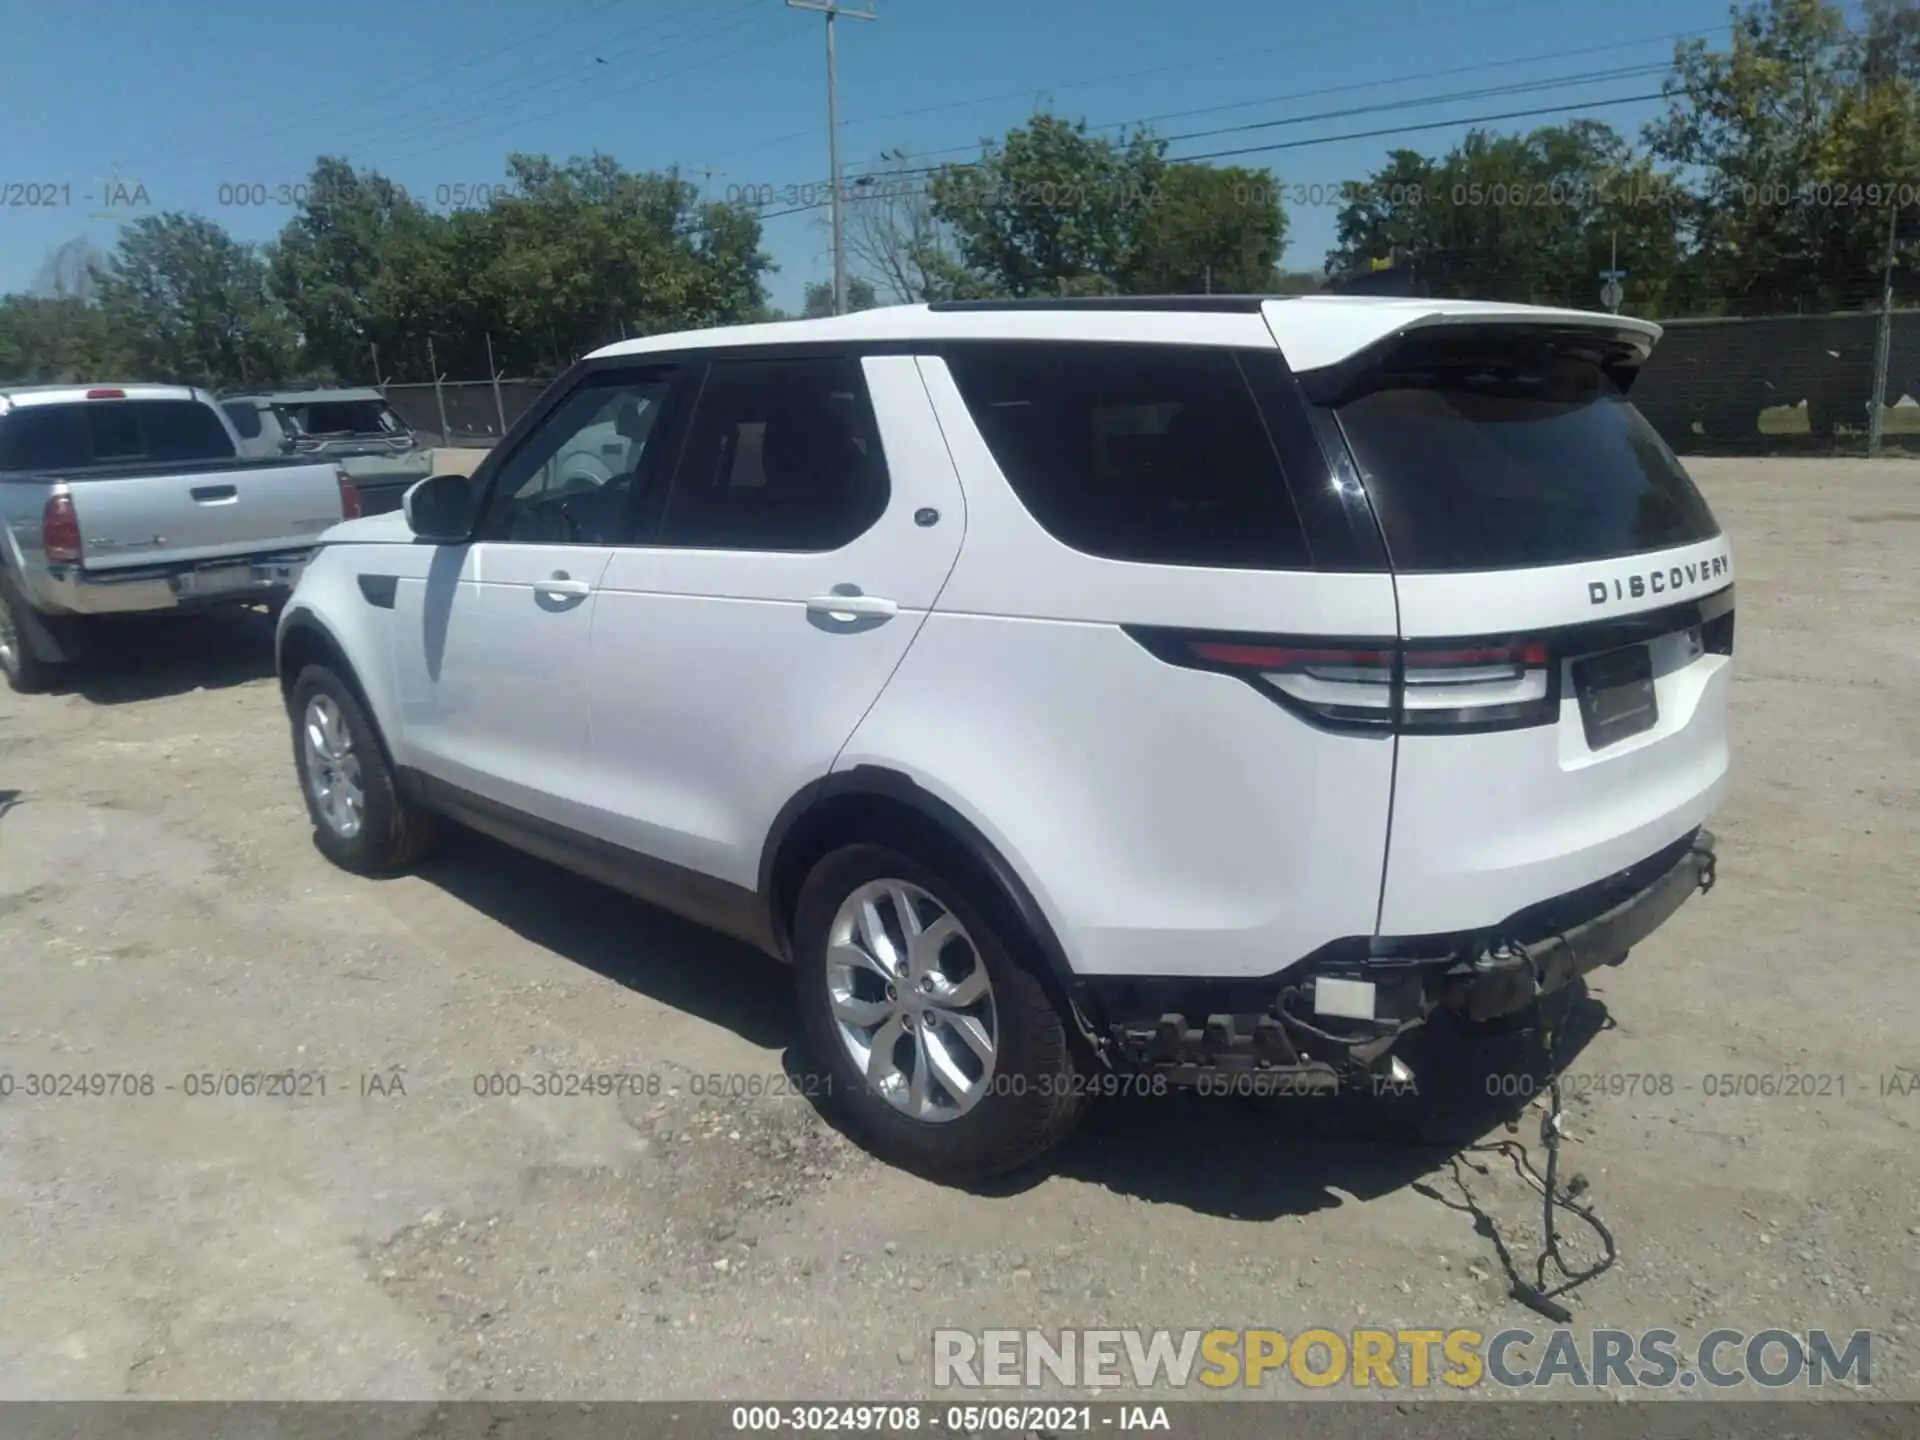 3 Photograph of a damaged car SALRG2RV4L2417250 LAND ROVER DISCOVERY 2020